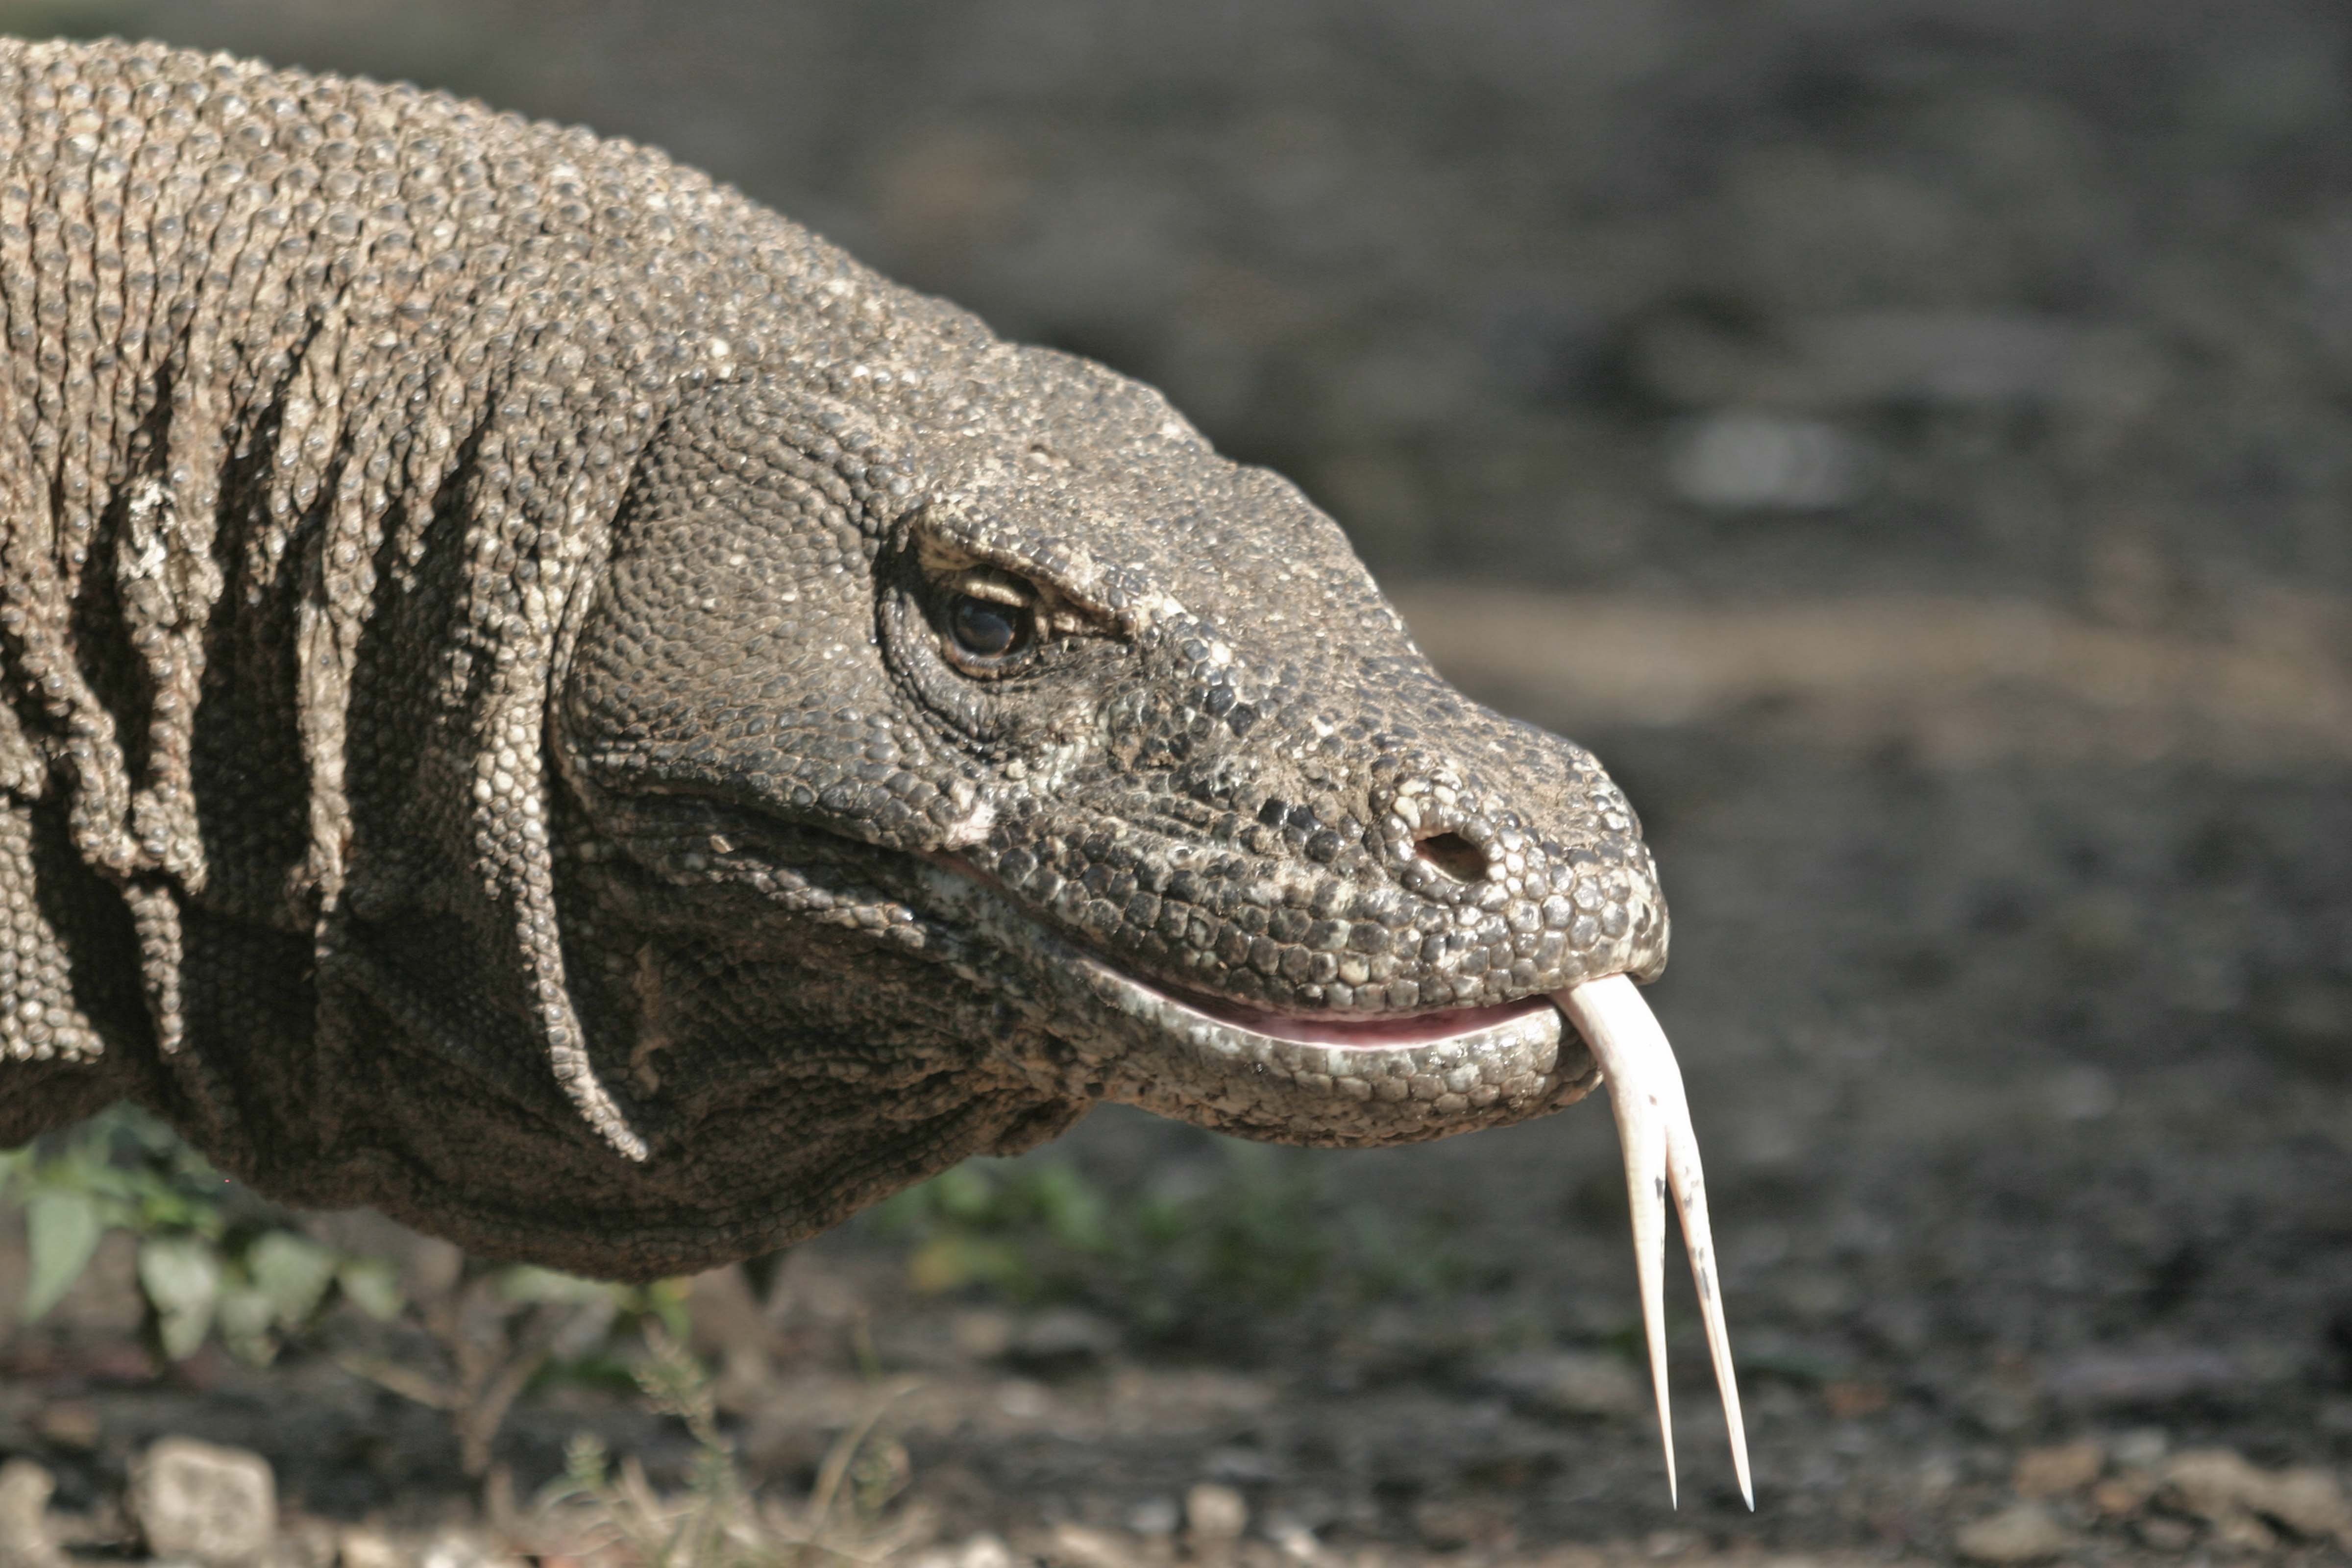 Indonesia, Komodo, Forked Tongue, 2006